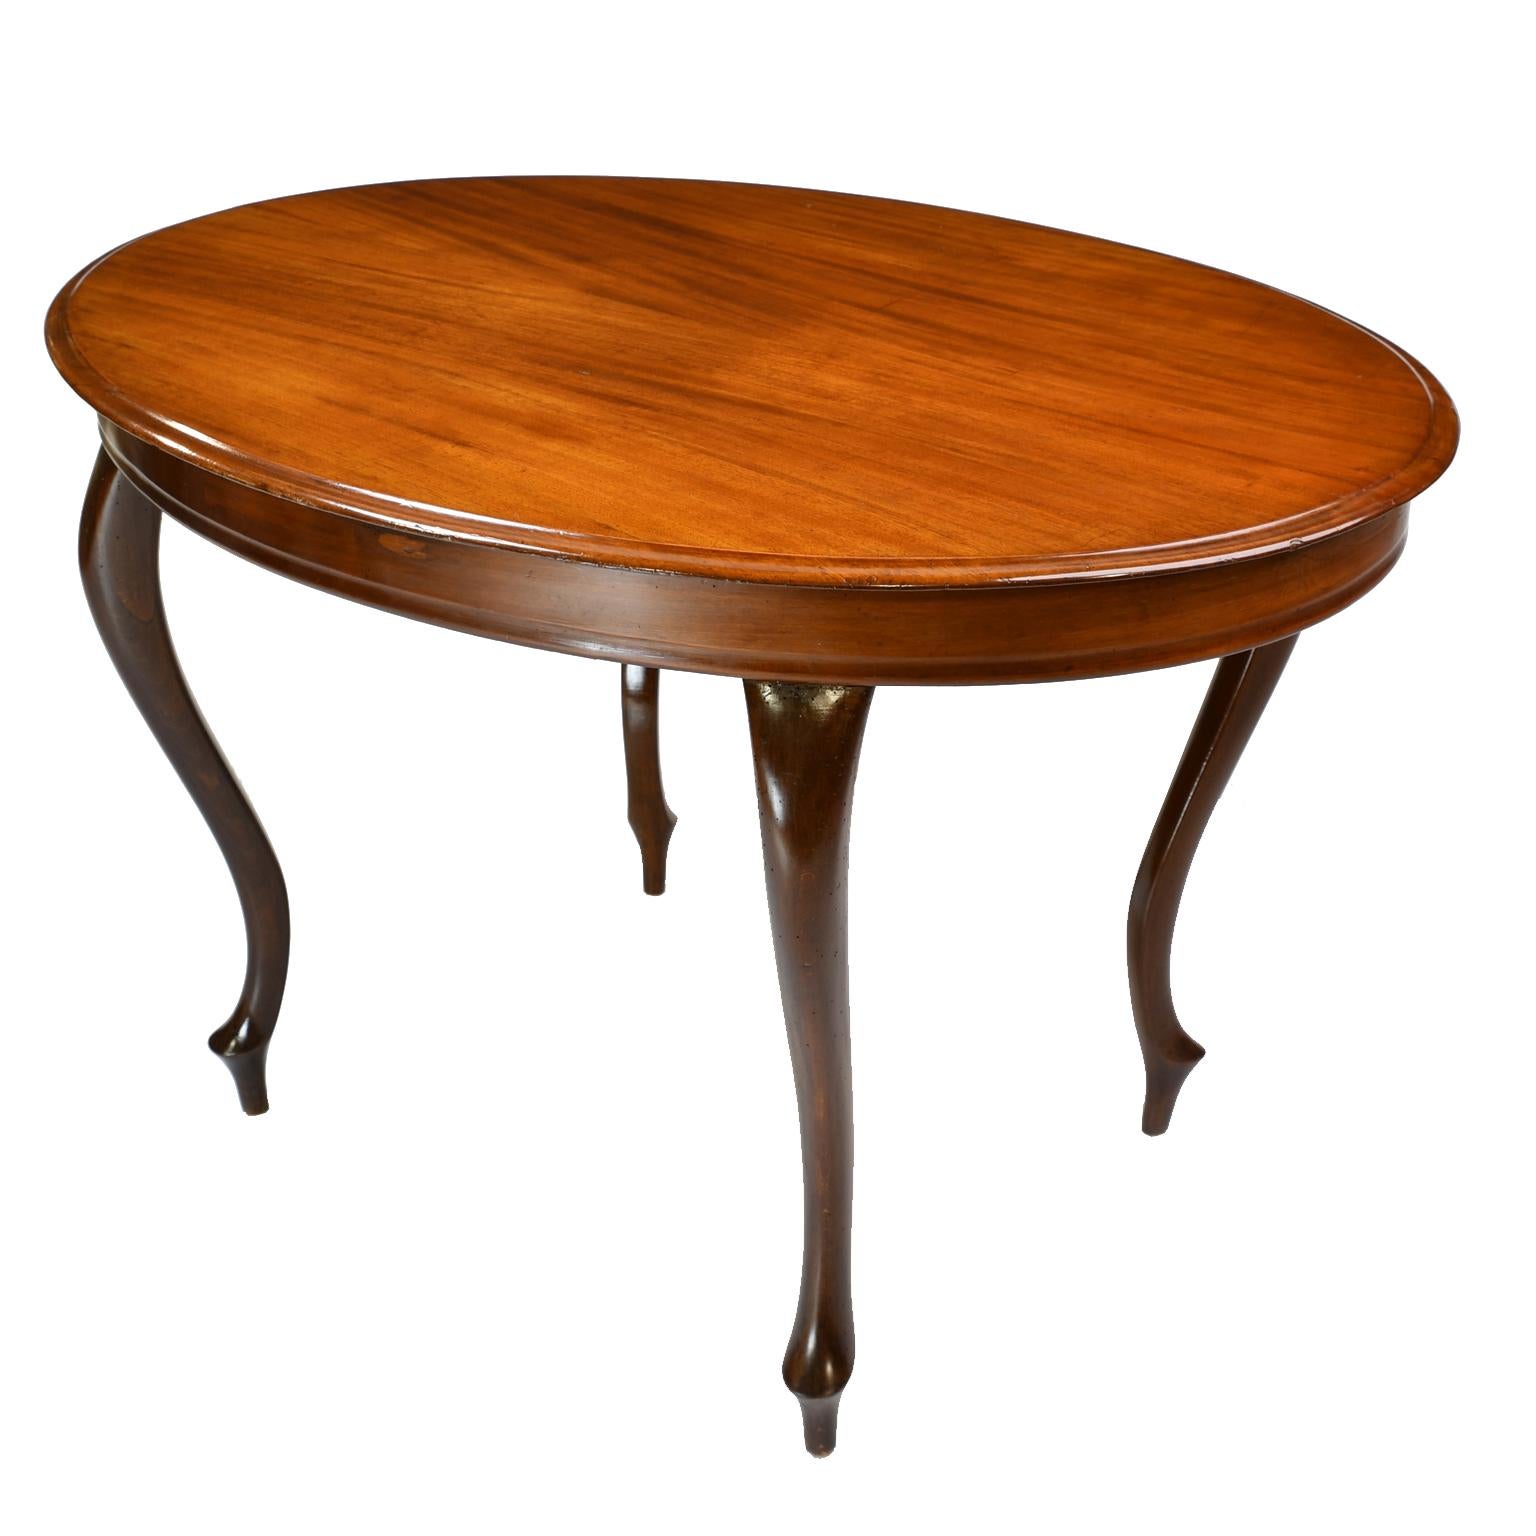 Beech Antique Louis Philippe Style Mahogany Oval Dining/ Center Table, Denmark, c 1860 For Sale